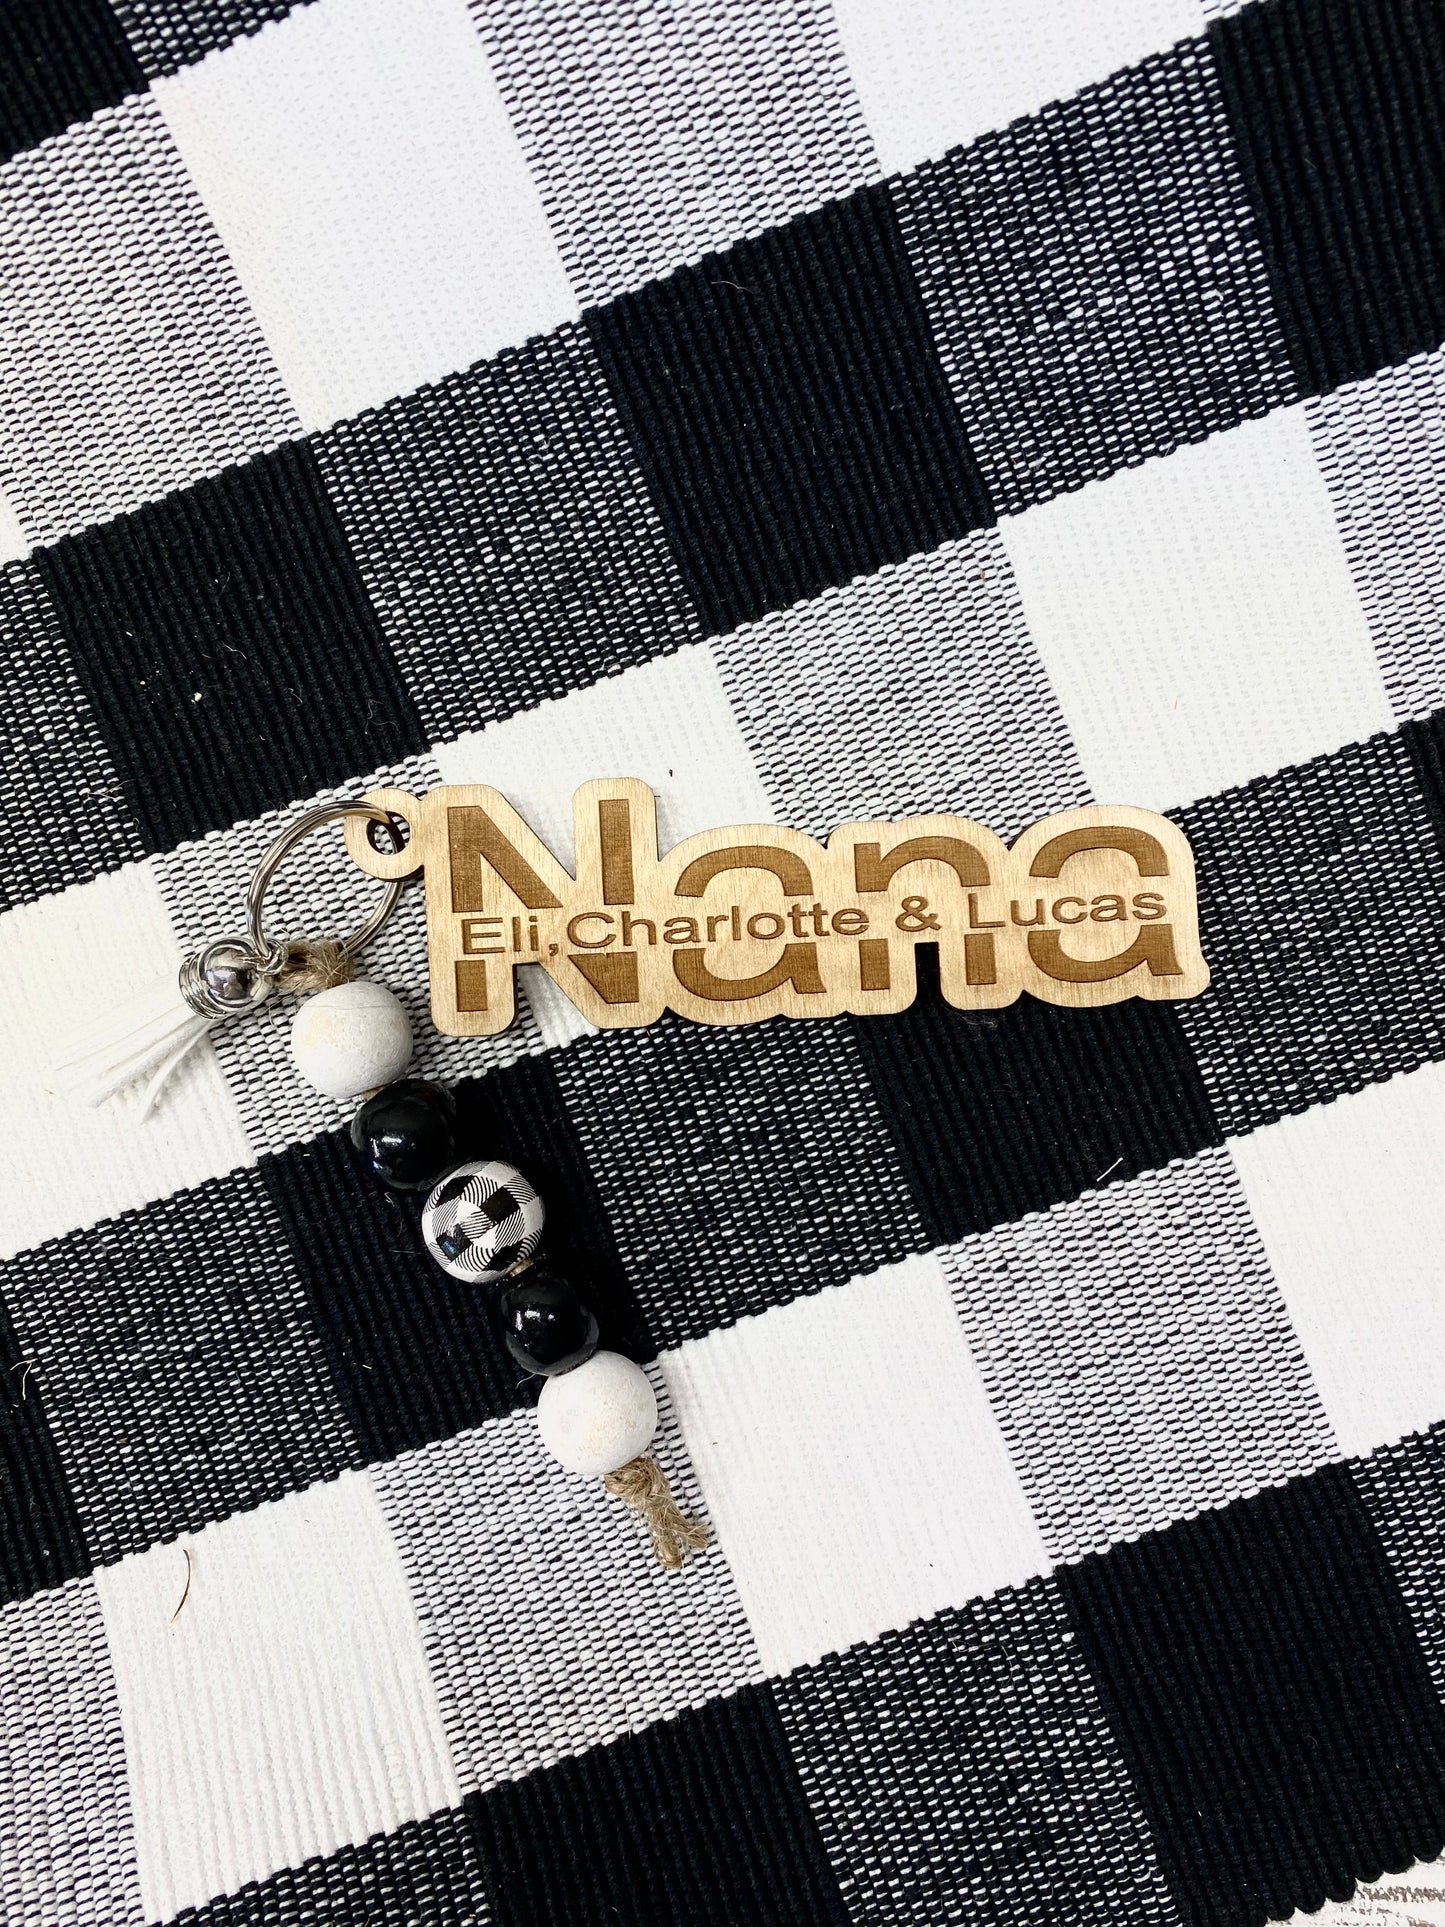 Nana Personalized Keychain with Kids Names, Wood Engraved Nana Keychain, Mother's Day Gift from Grandkids, Grandma Gift